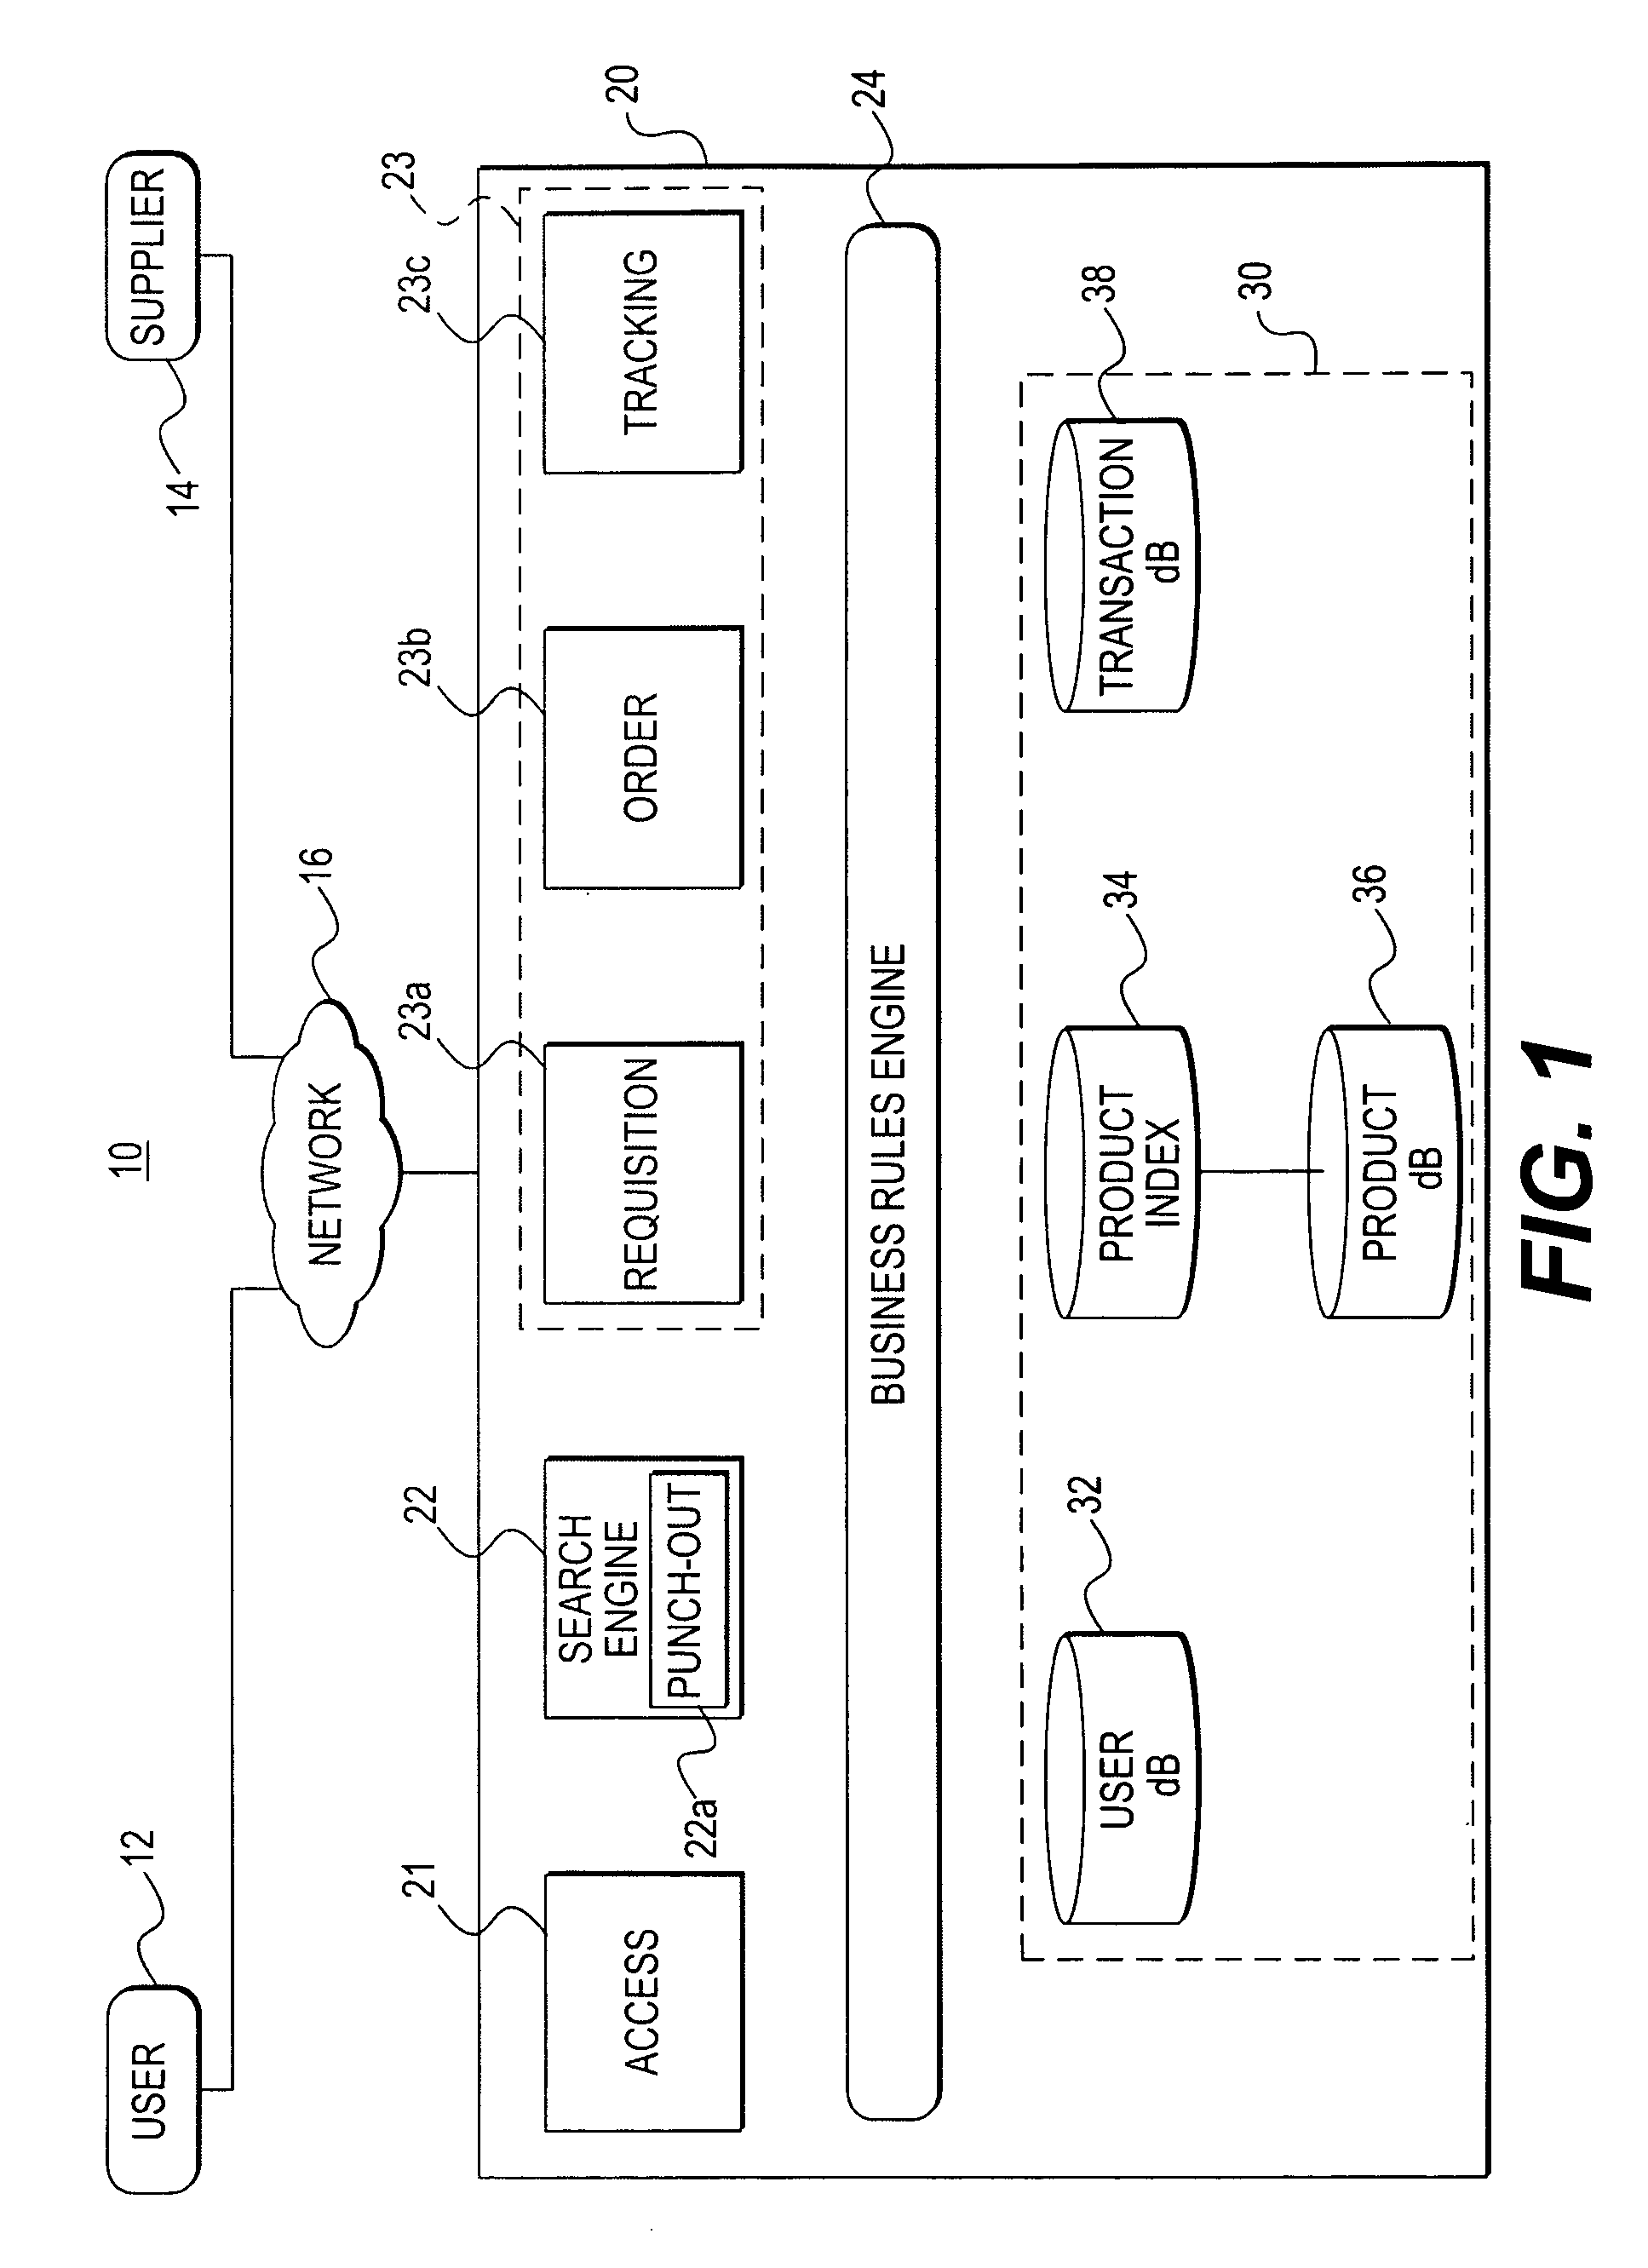 Method, medium, and system for processing requisitions